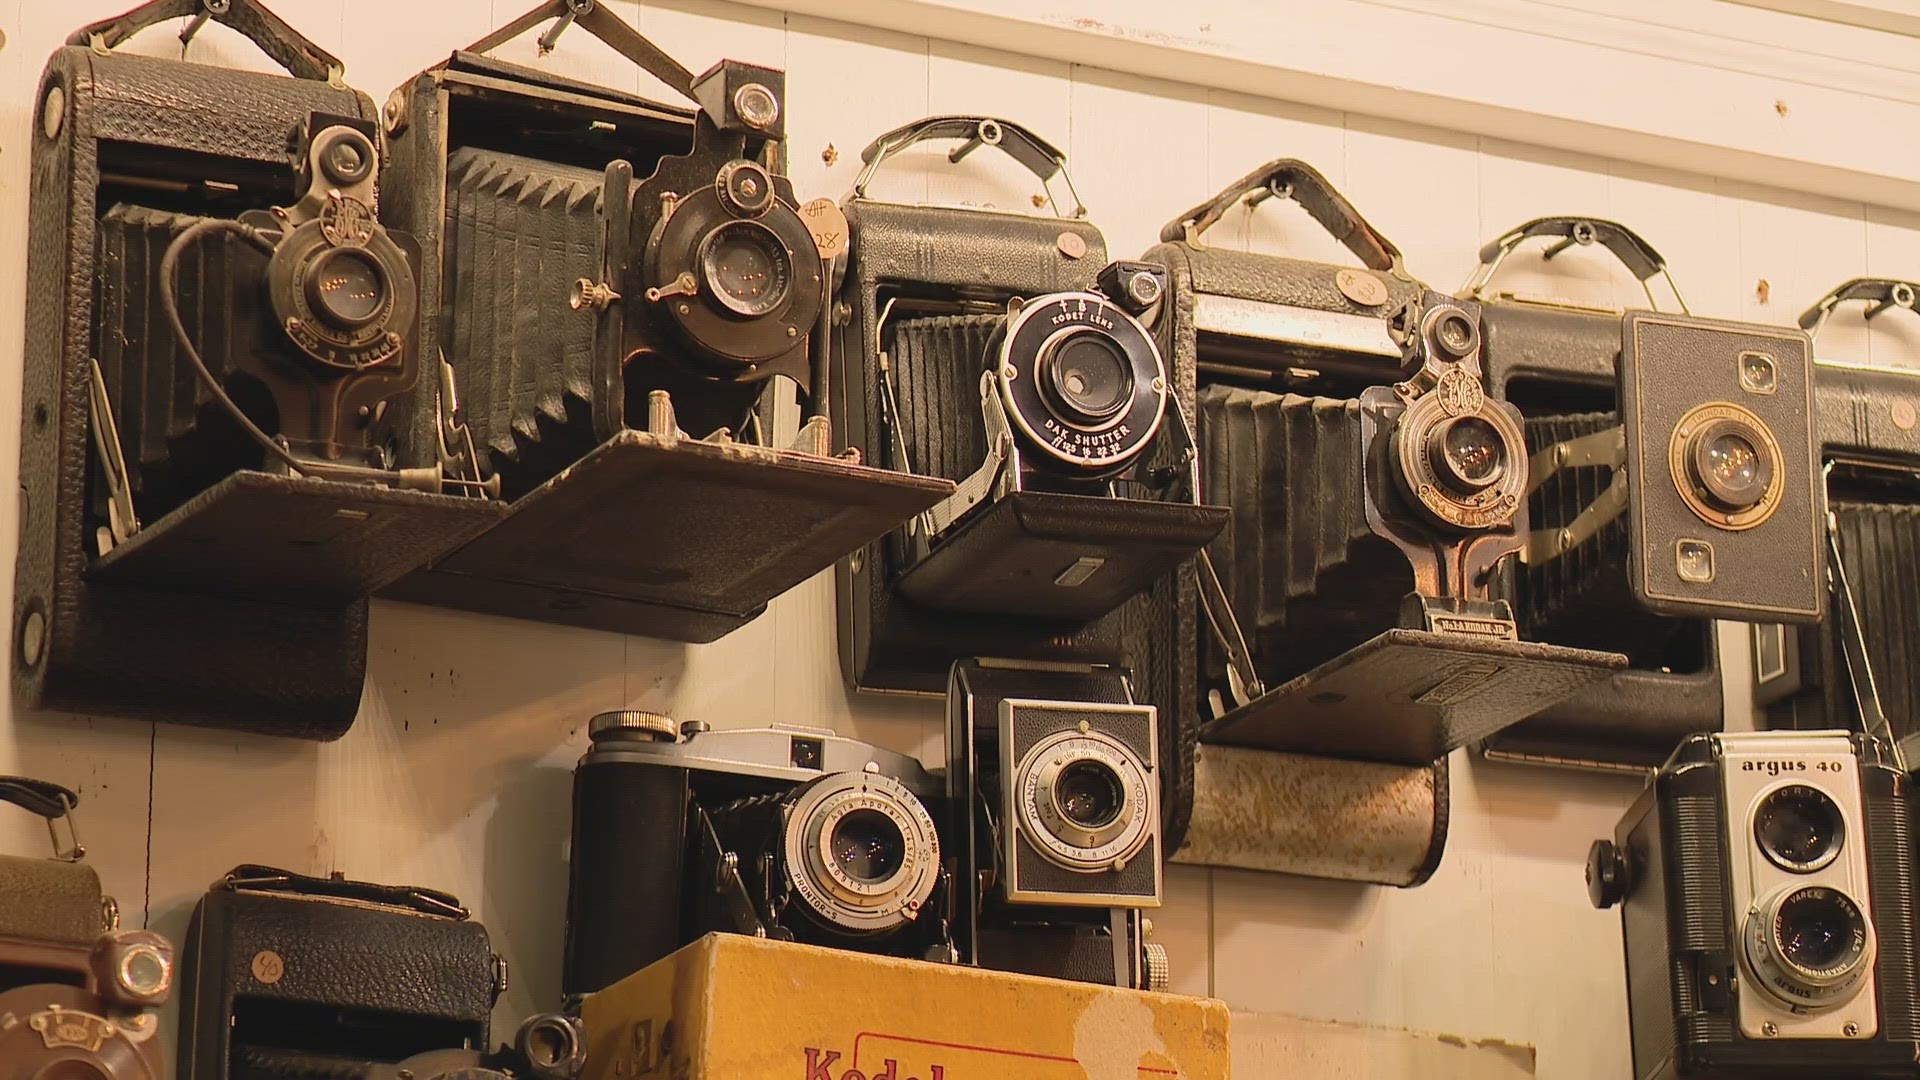 At STL Vintage Camera, you'll find owner Andy Holman either tinkering with old cameras or talking about them. His shop holds close to 700 of them.